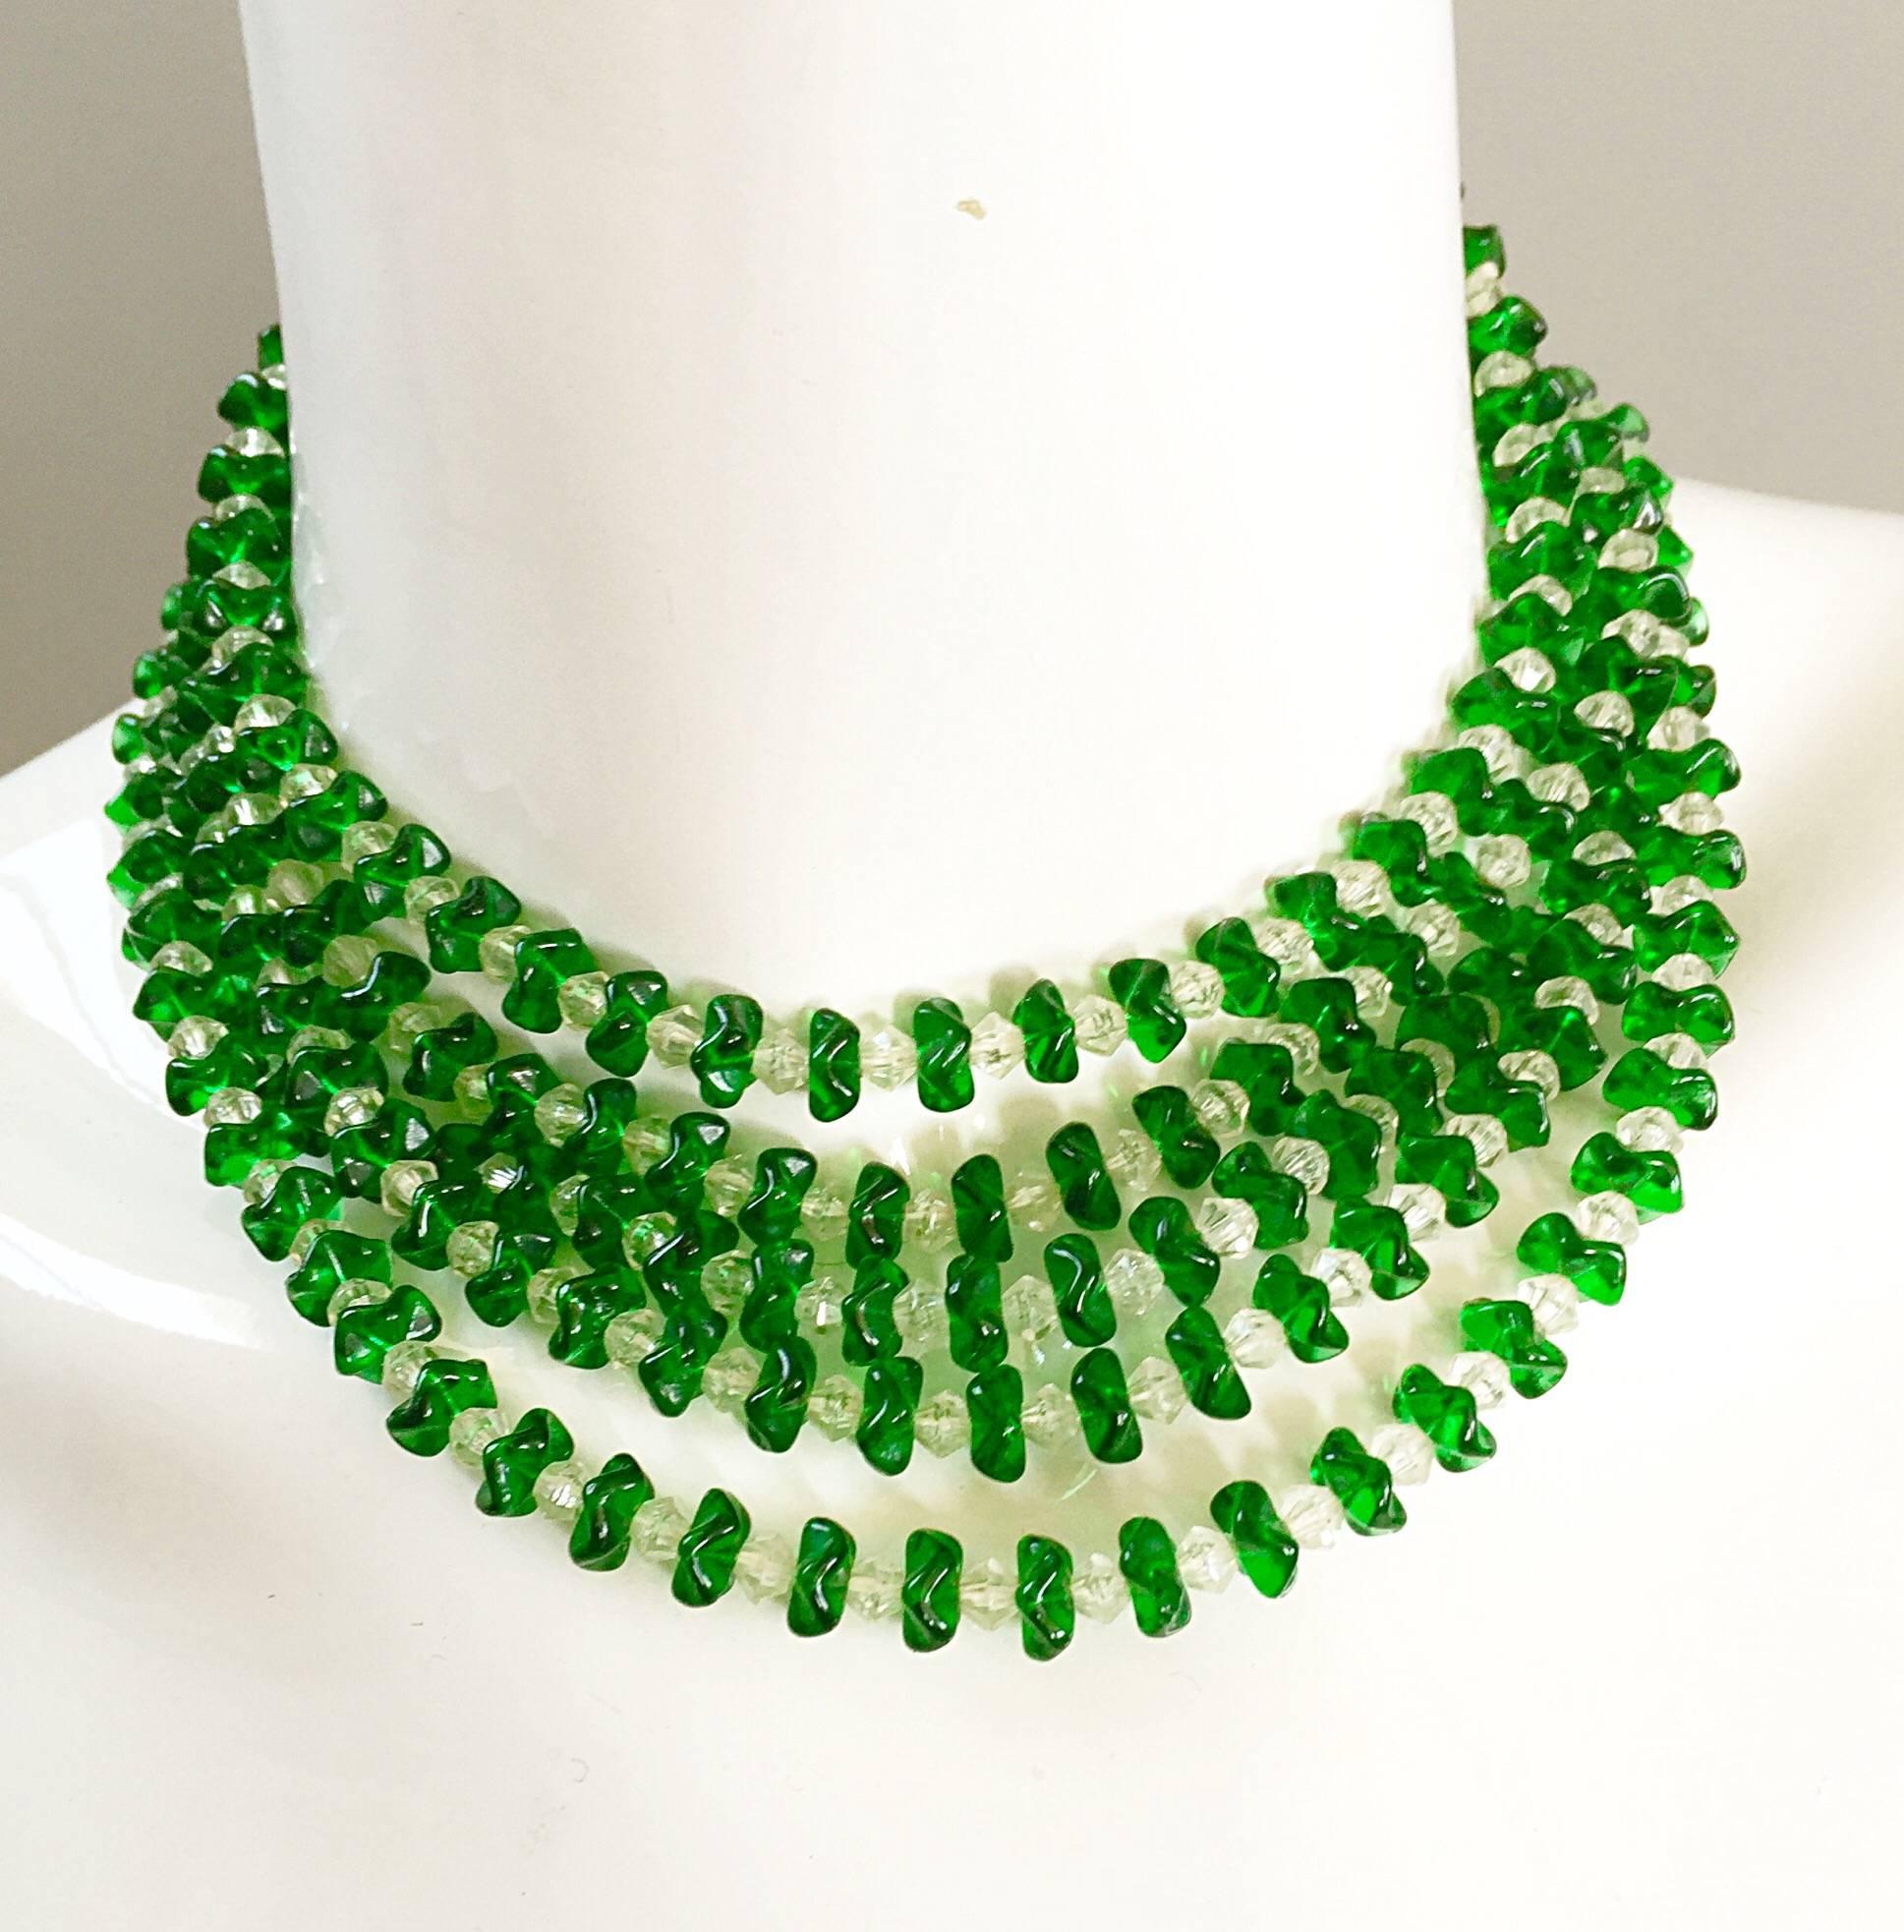 Beautiful vintage (signed) LISNER 1960s sapphire green and clear lucite waterfall necklace! Vibrant green adds just the right amount of pop to any outfit! Can easily be dressed up or down. Adjustable decorative silver clasp in back. Great with a